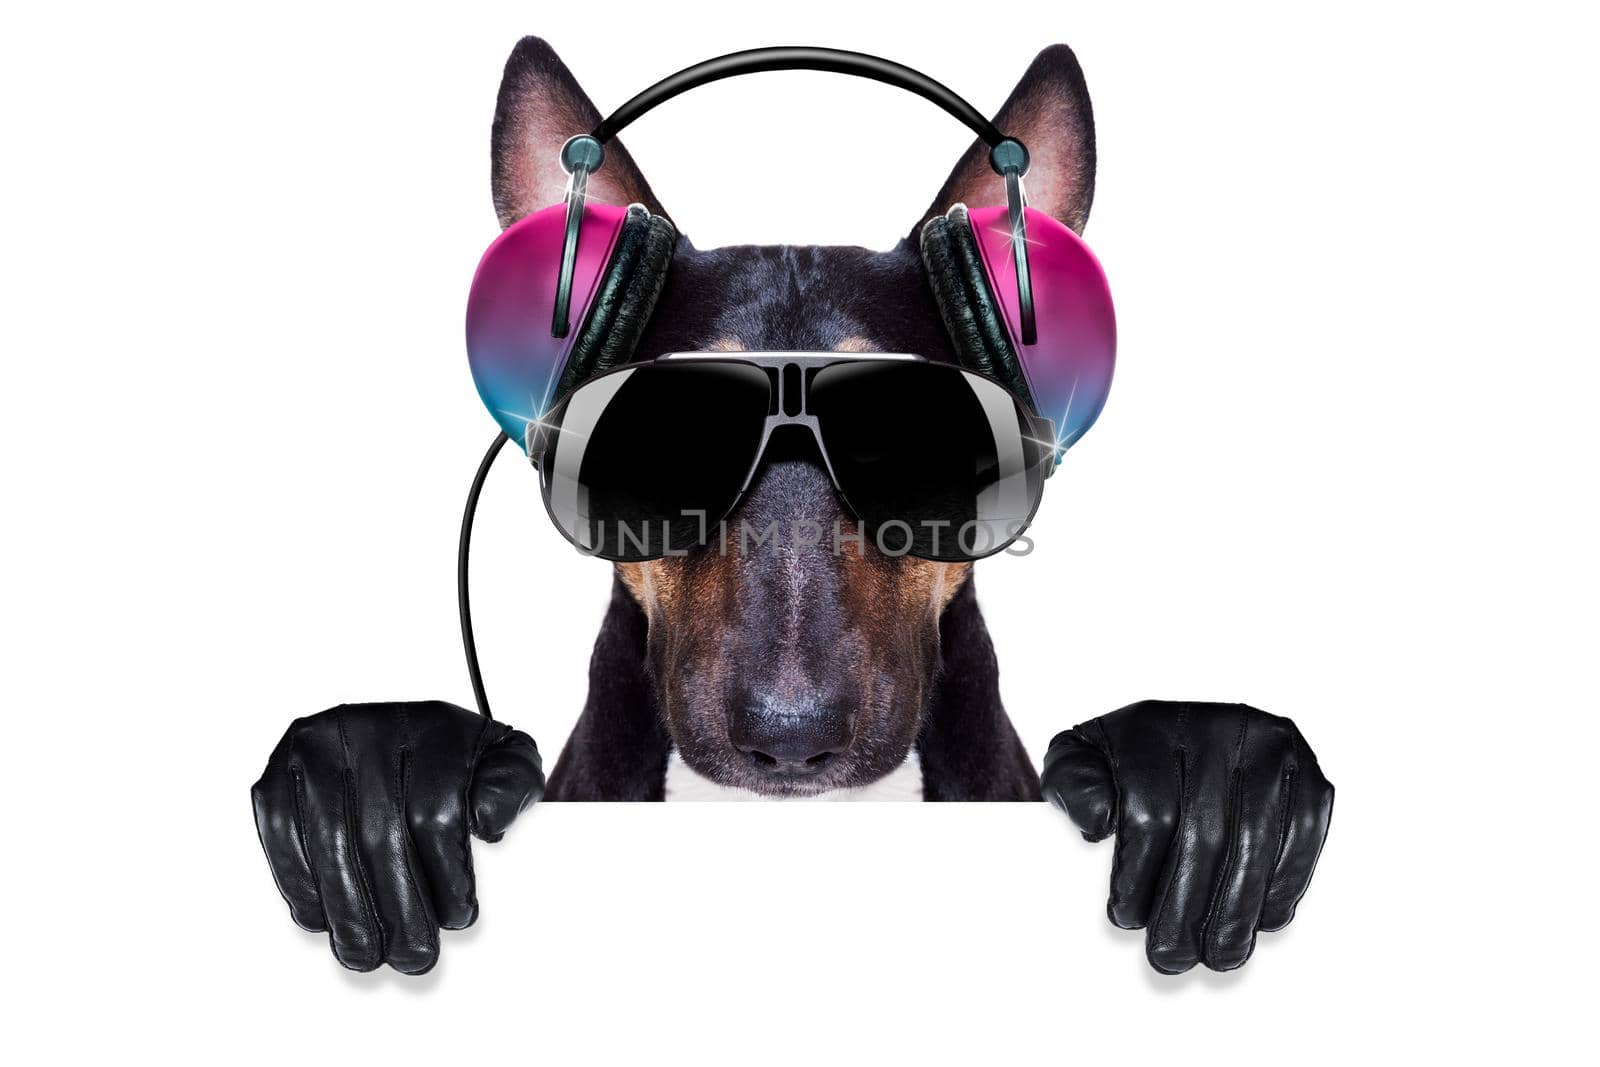 Dj bull terrier dog playing music in a club with disco ball , isolated on white background, behind banner or placard